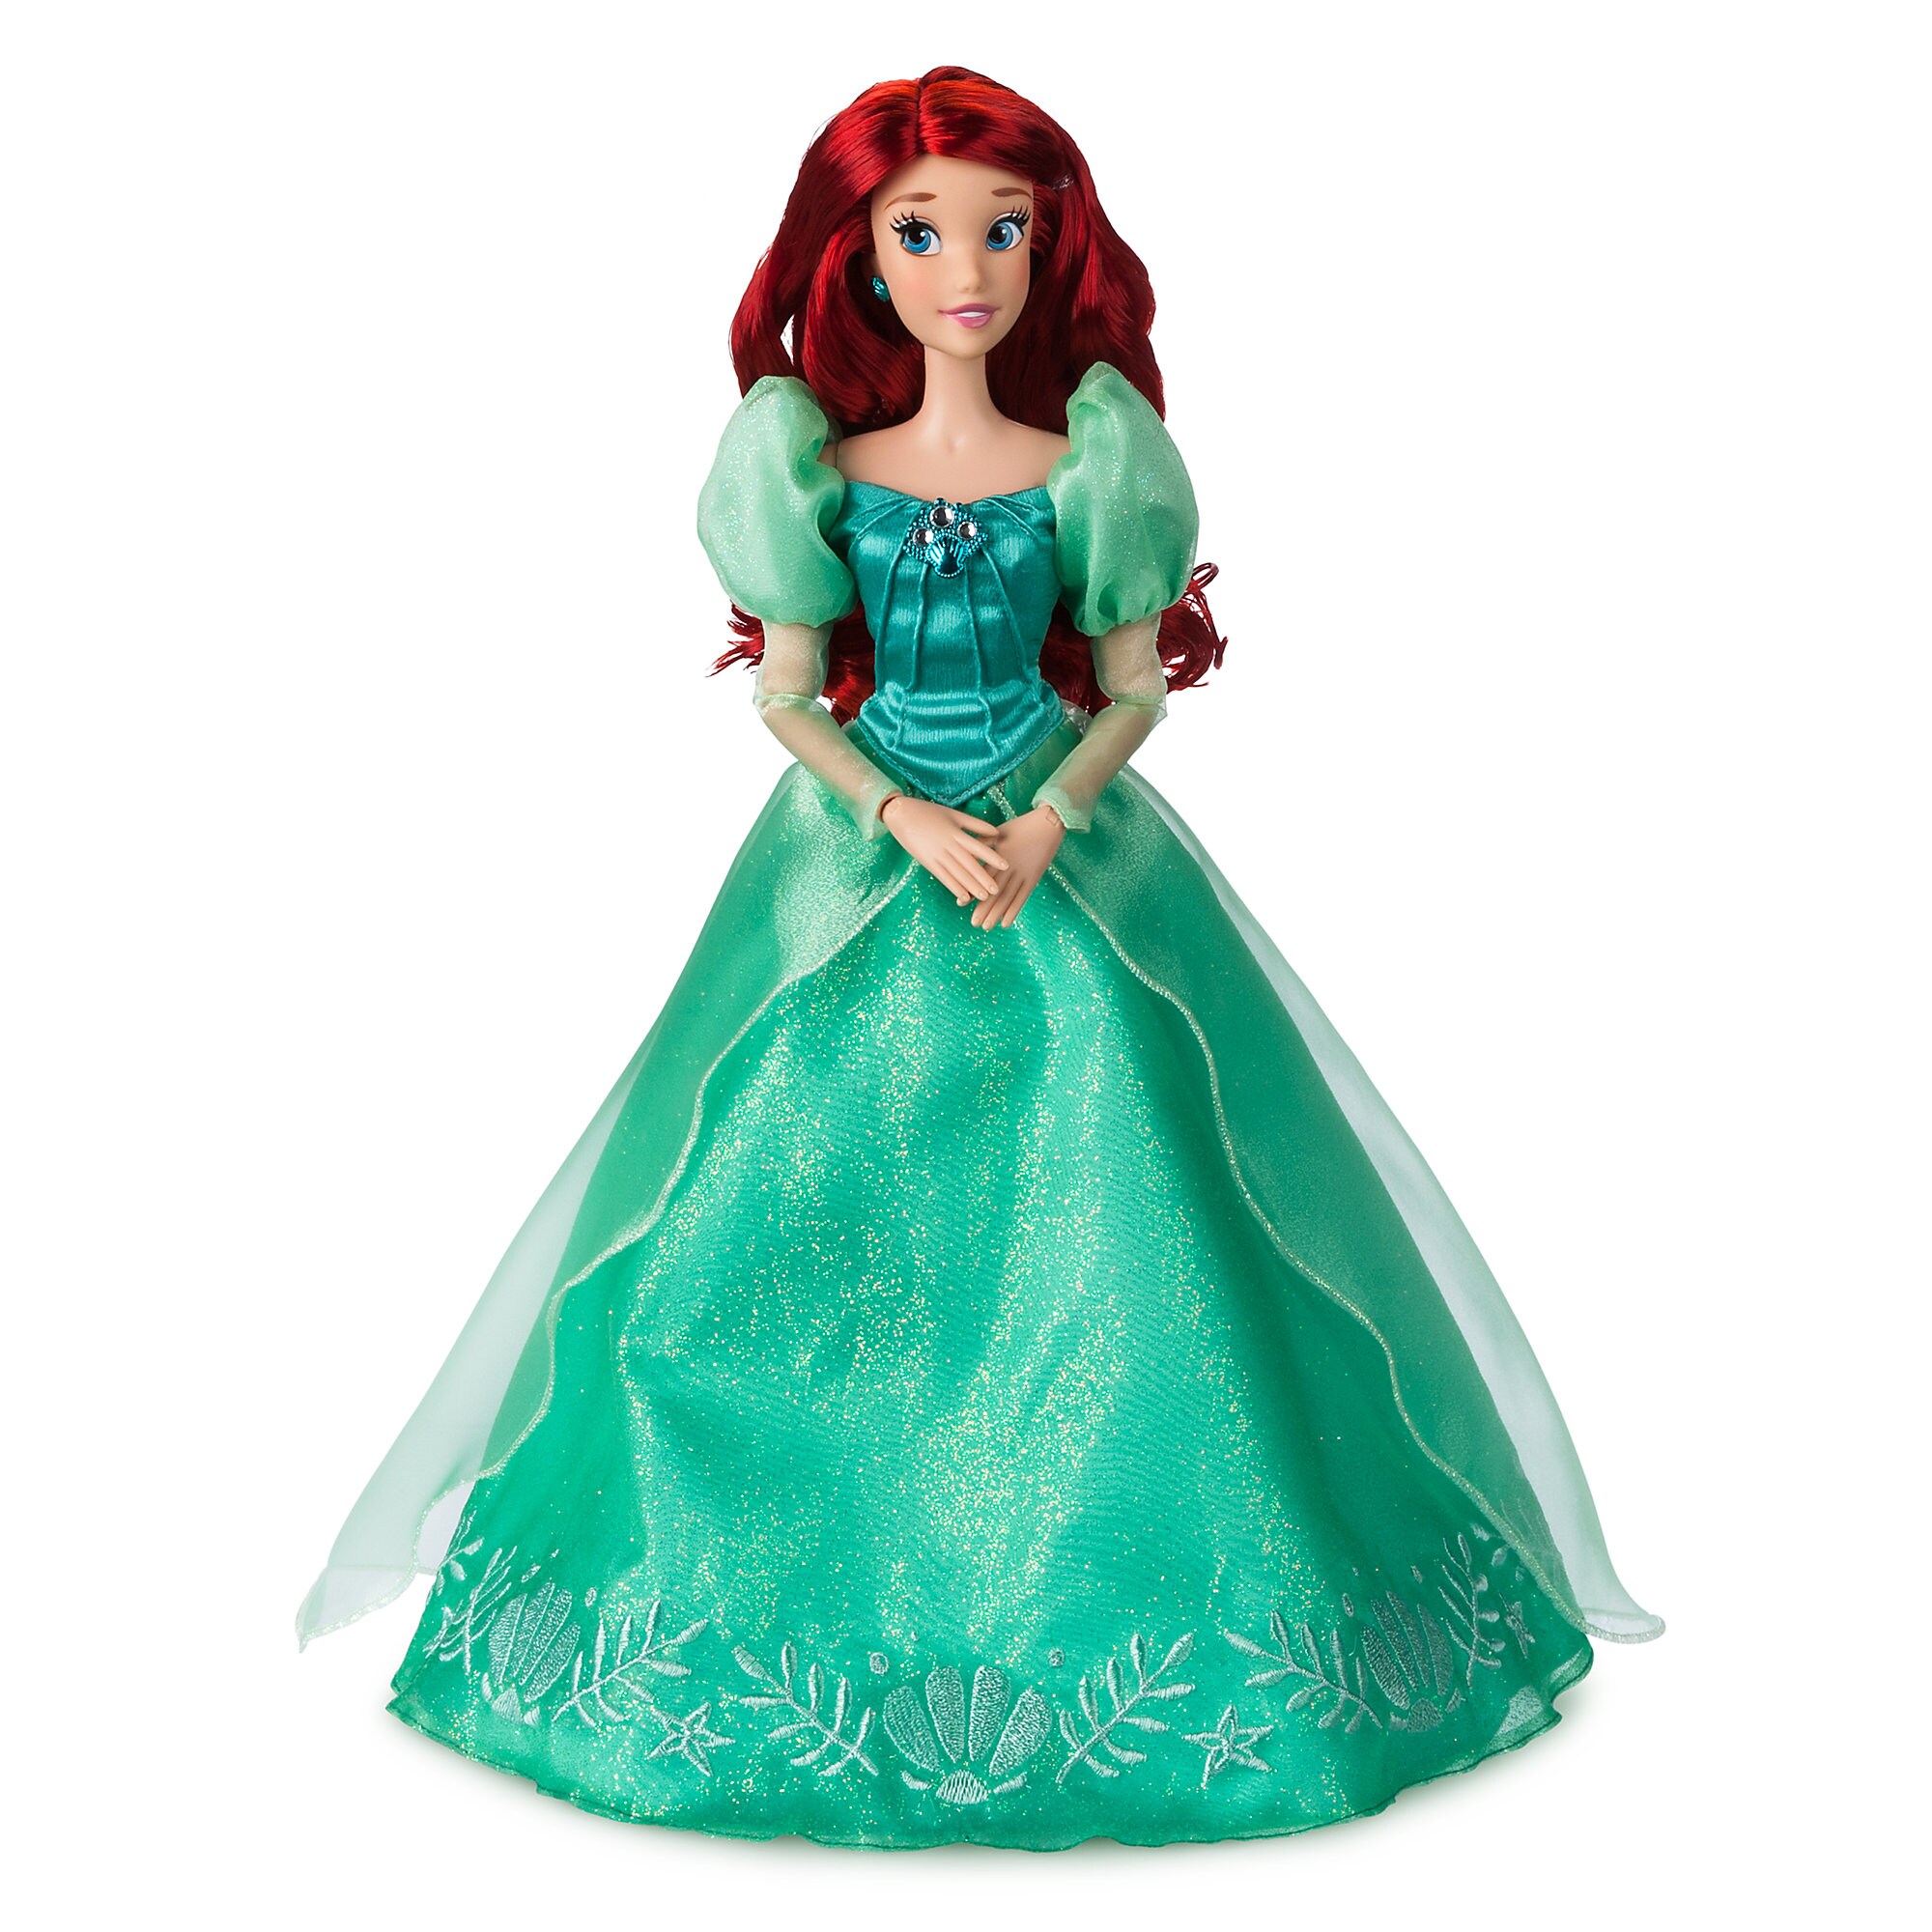 Ariel's Celebration Doll - The Little Mermaid - Limited Edition - 16